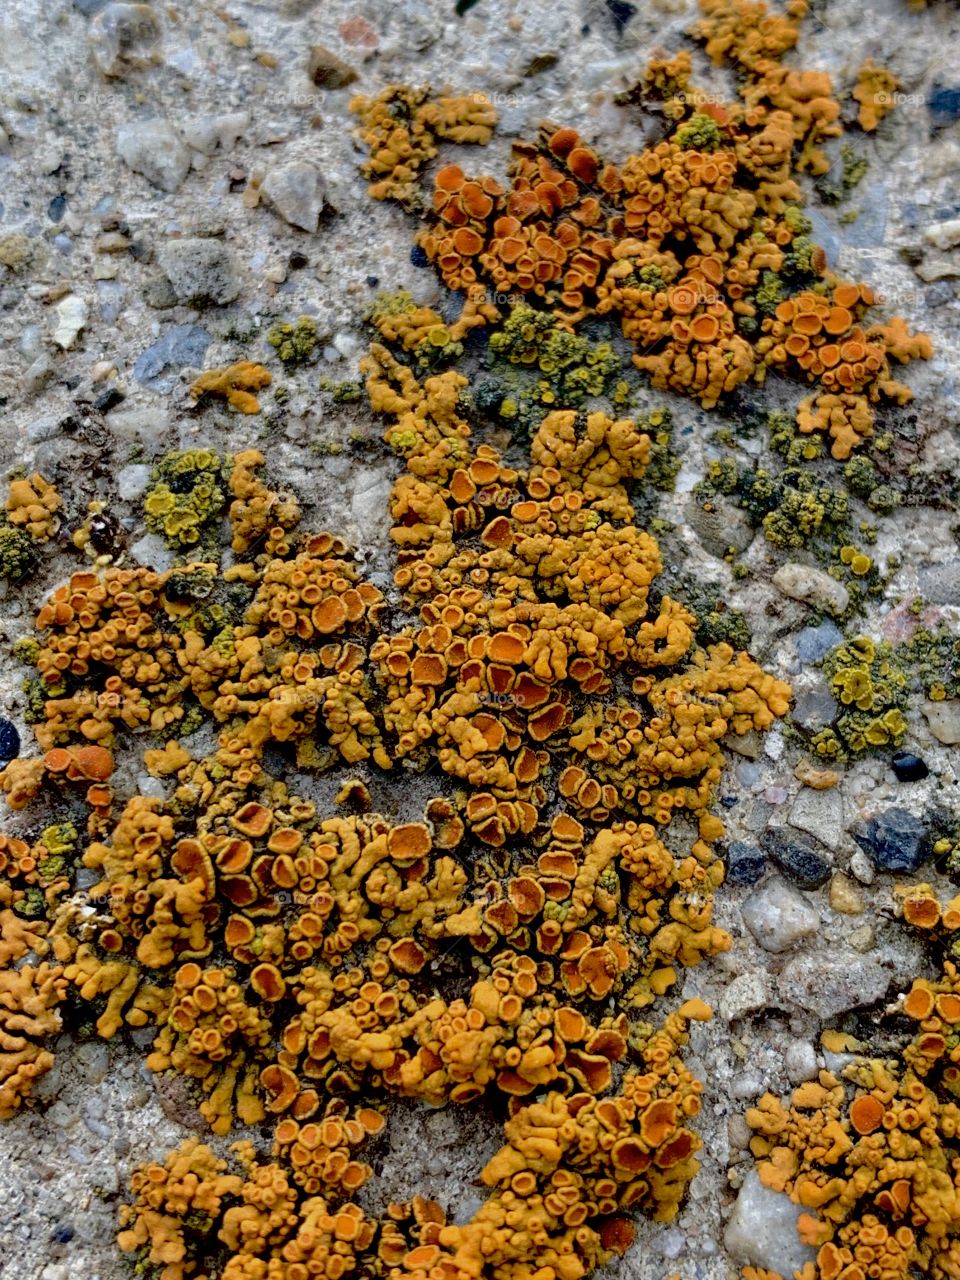 Life grows where life stopped. This moss grows on a stone wall that surrounded a witch’s hut in Memory Grove Park near downtown Salt Lake City. The bright yellows and deep oranges bring life to stone cold wall.